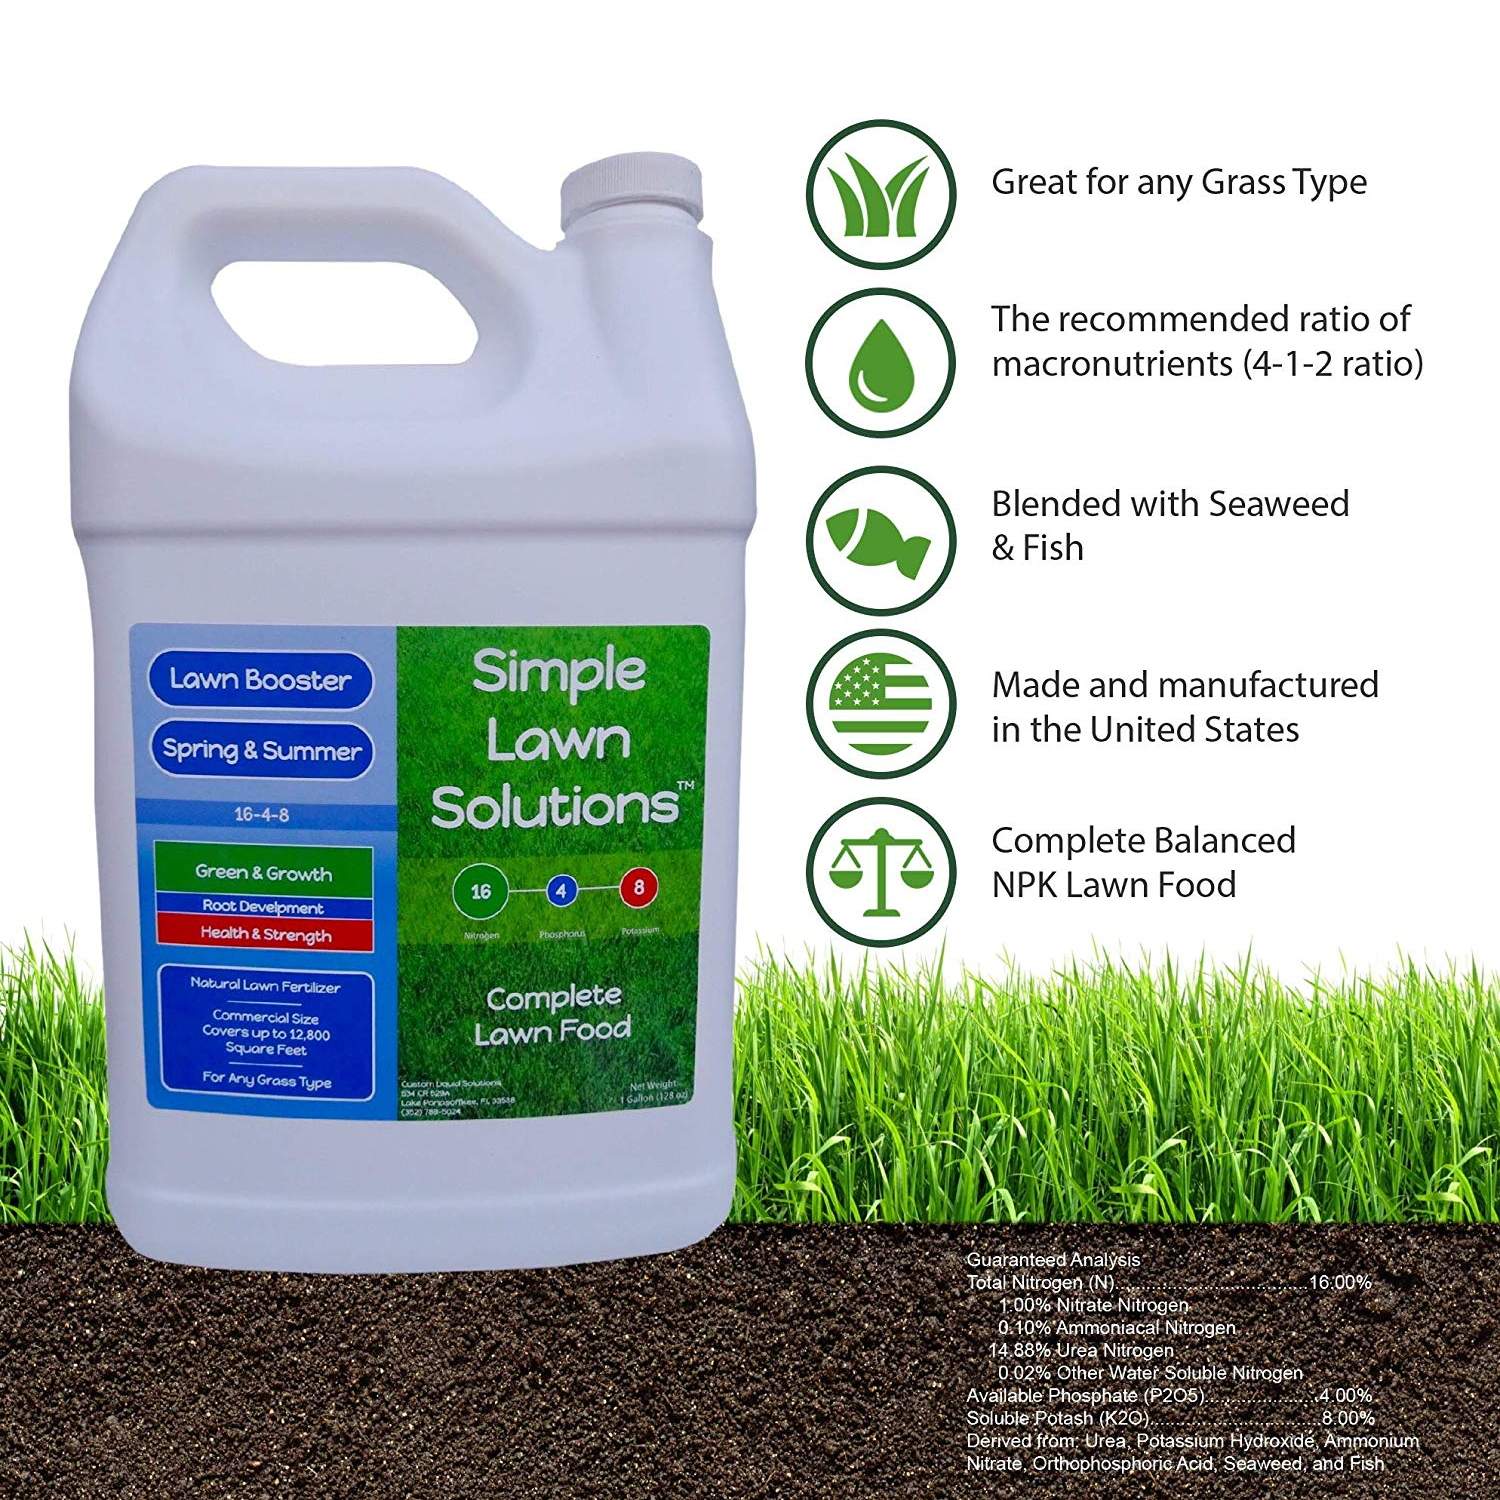 5 Best Organic Lawn Fertilizers Reviewed in Detail (Aug. 2021)